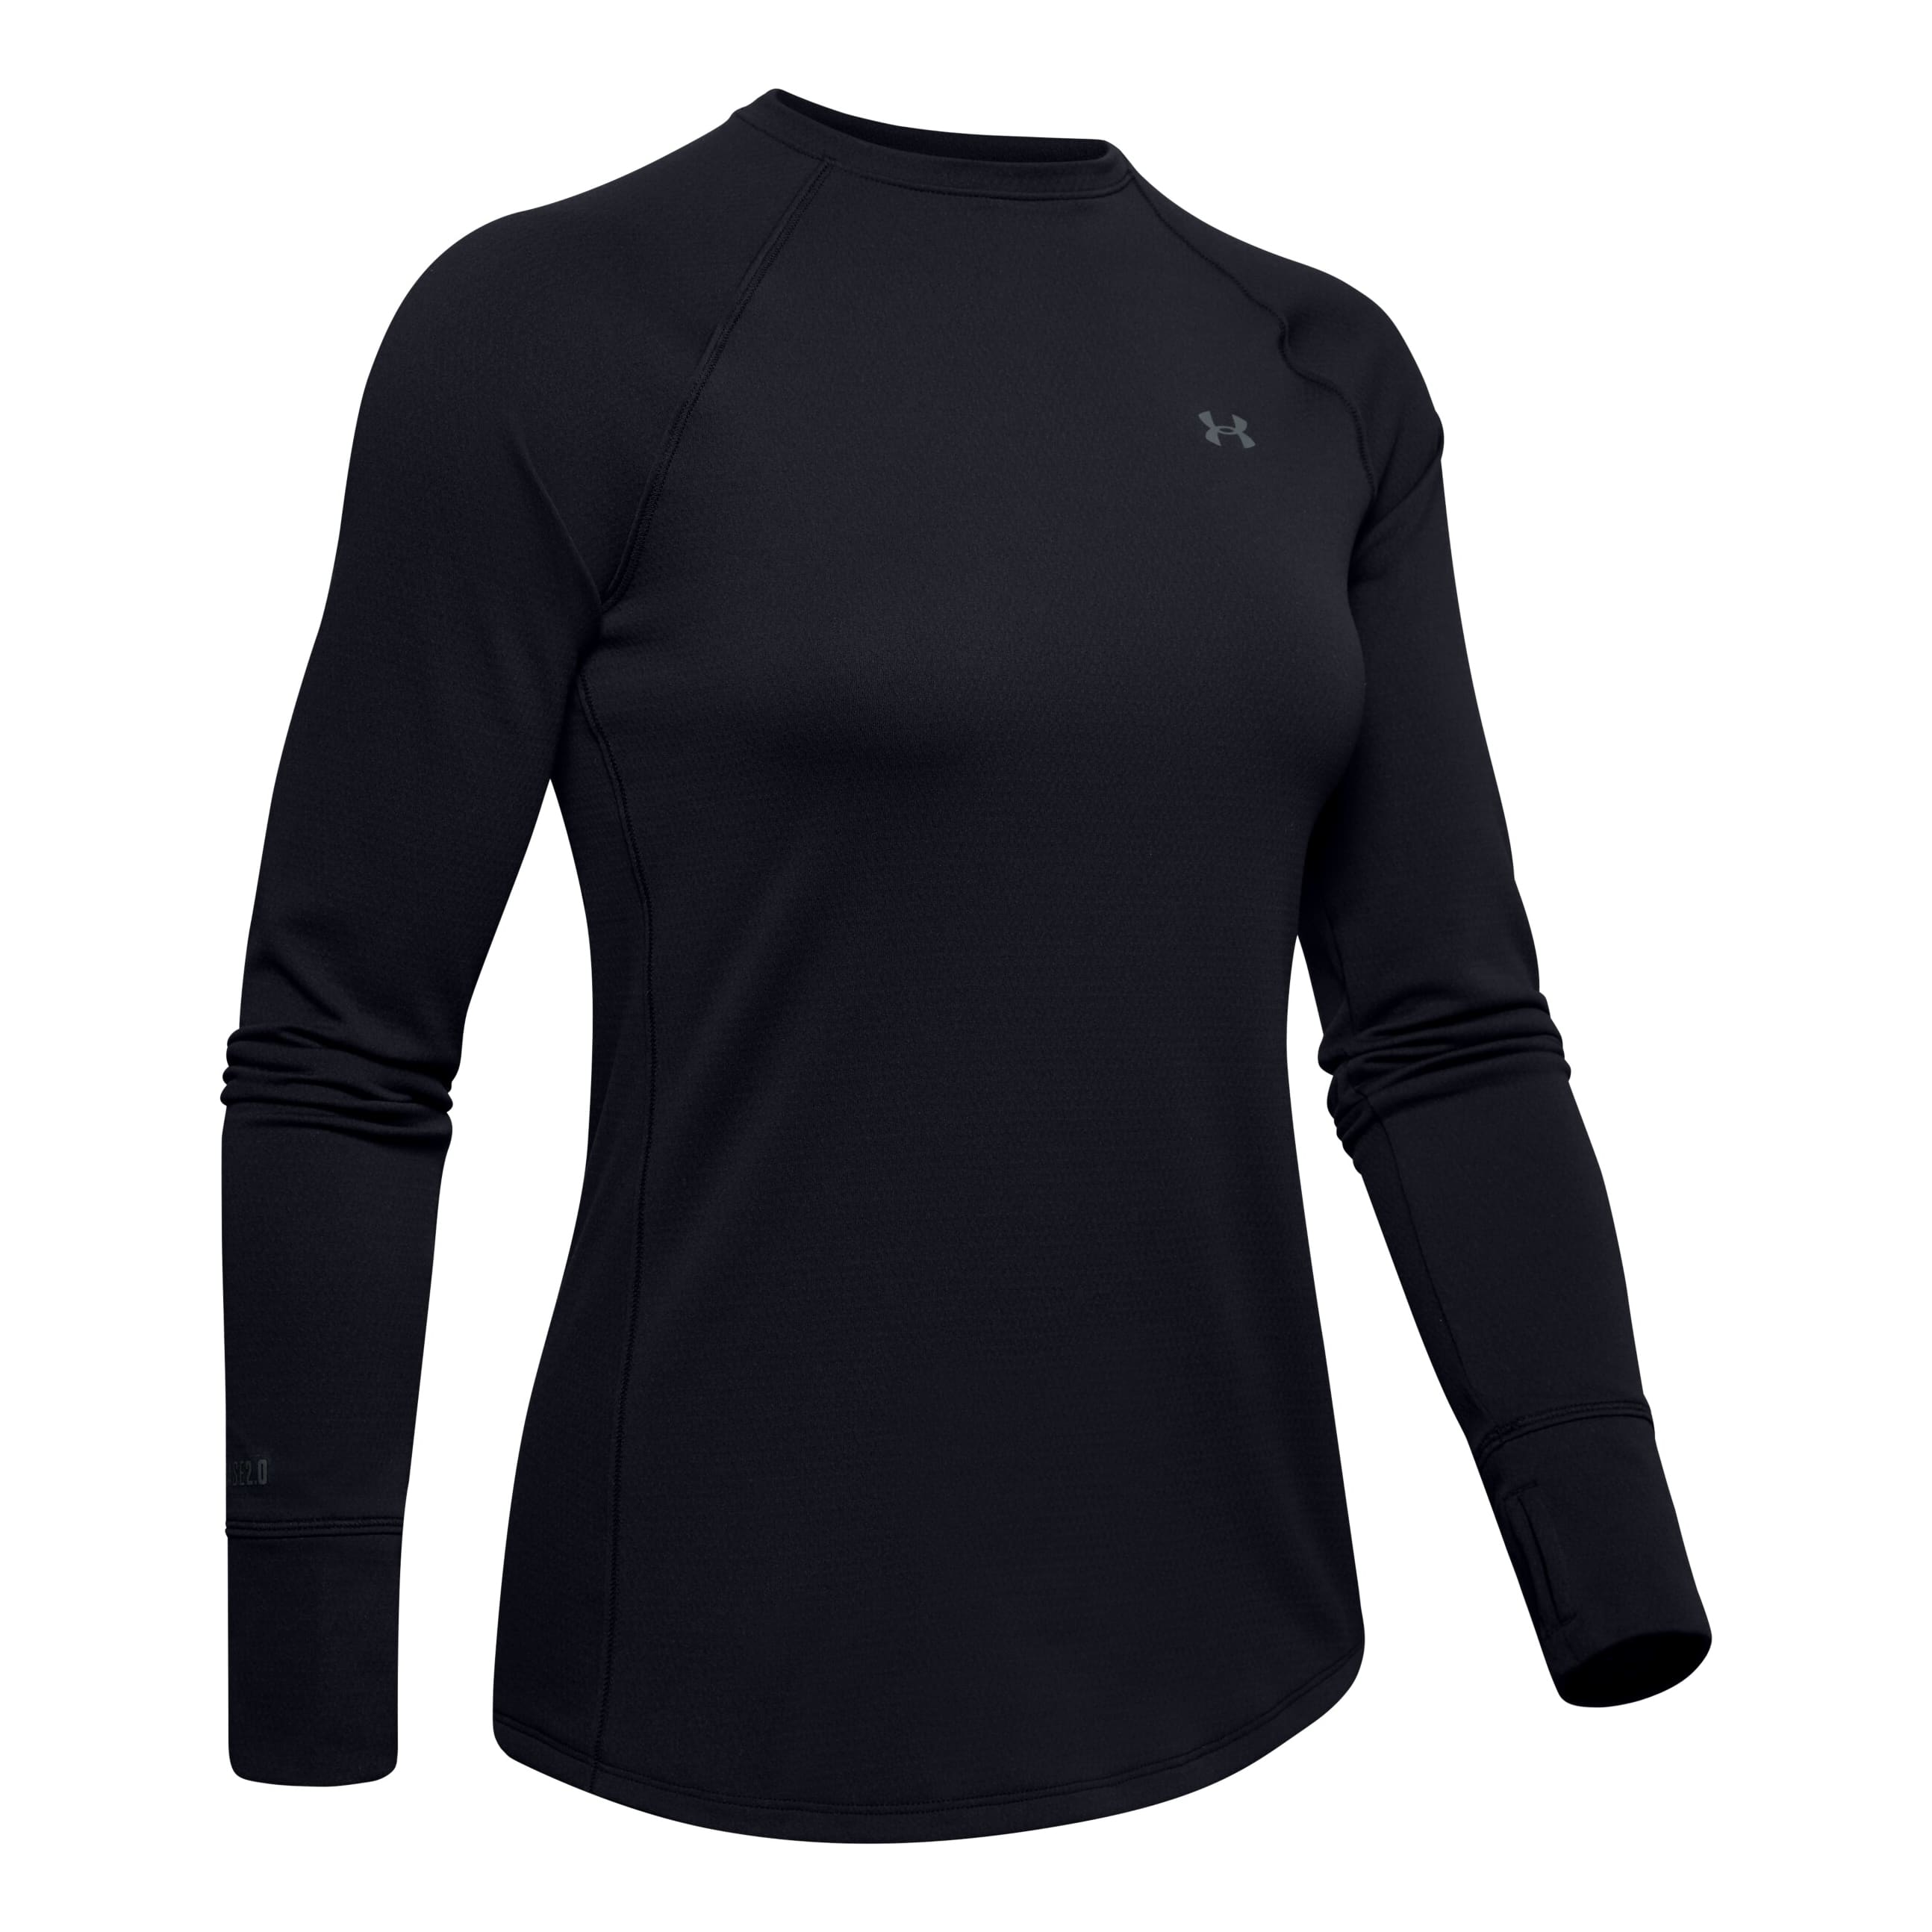 Under Armour Women's Coldgear Mock Fitted Long Sleeve Running Top